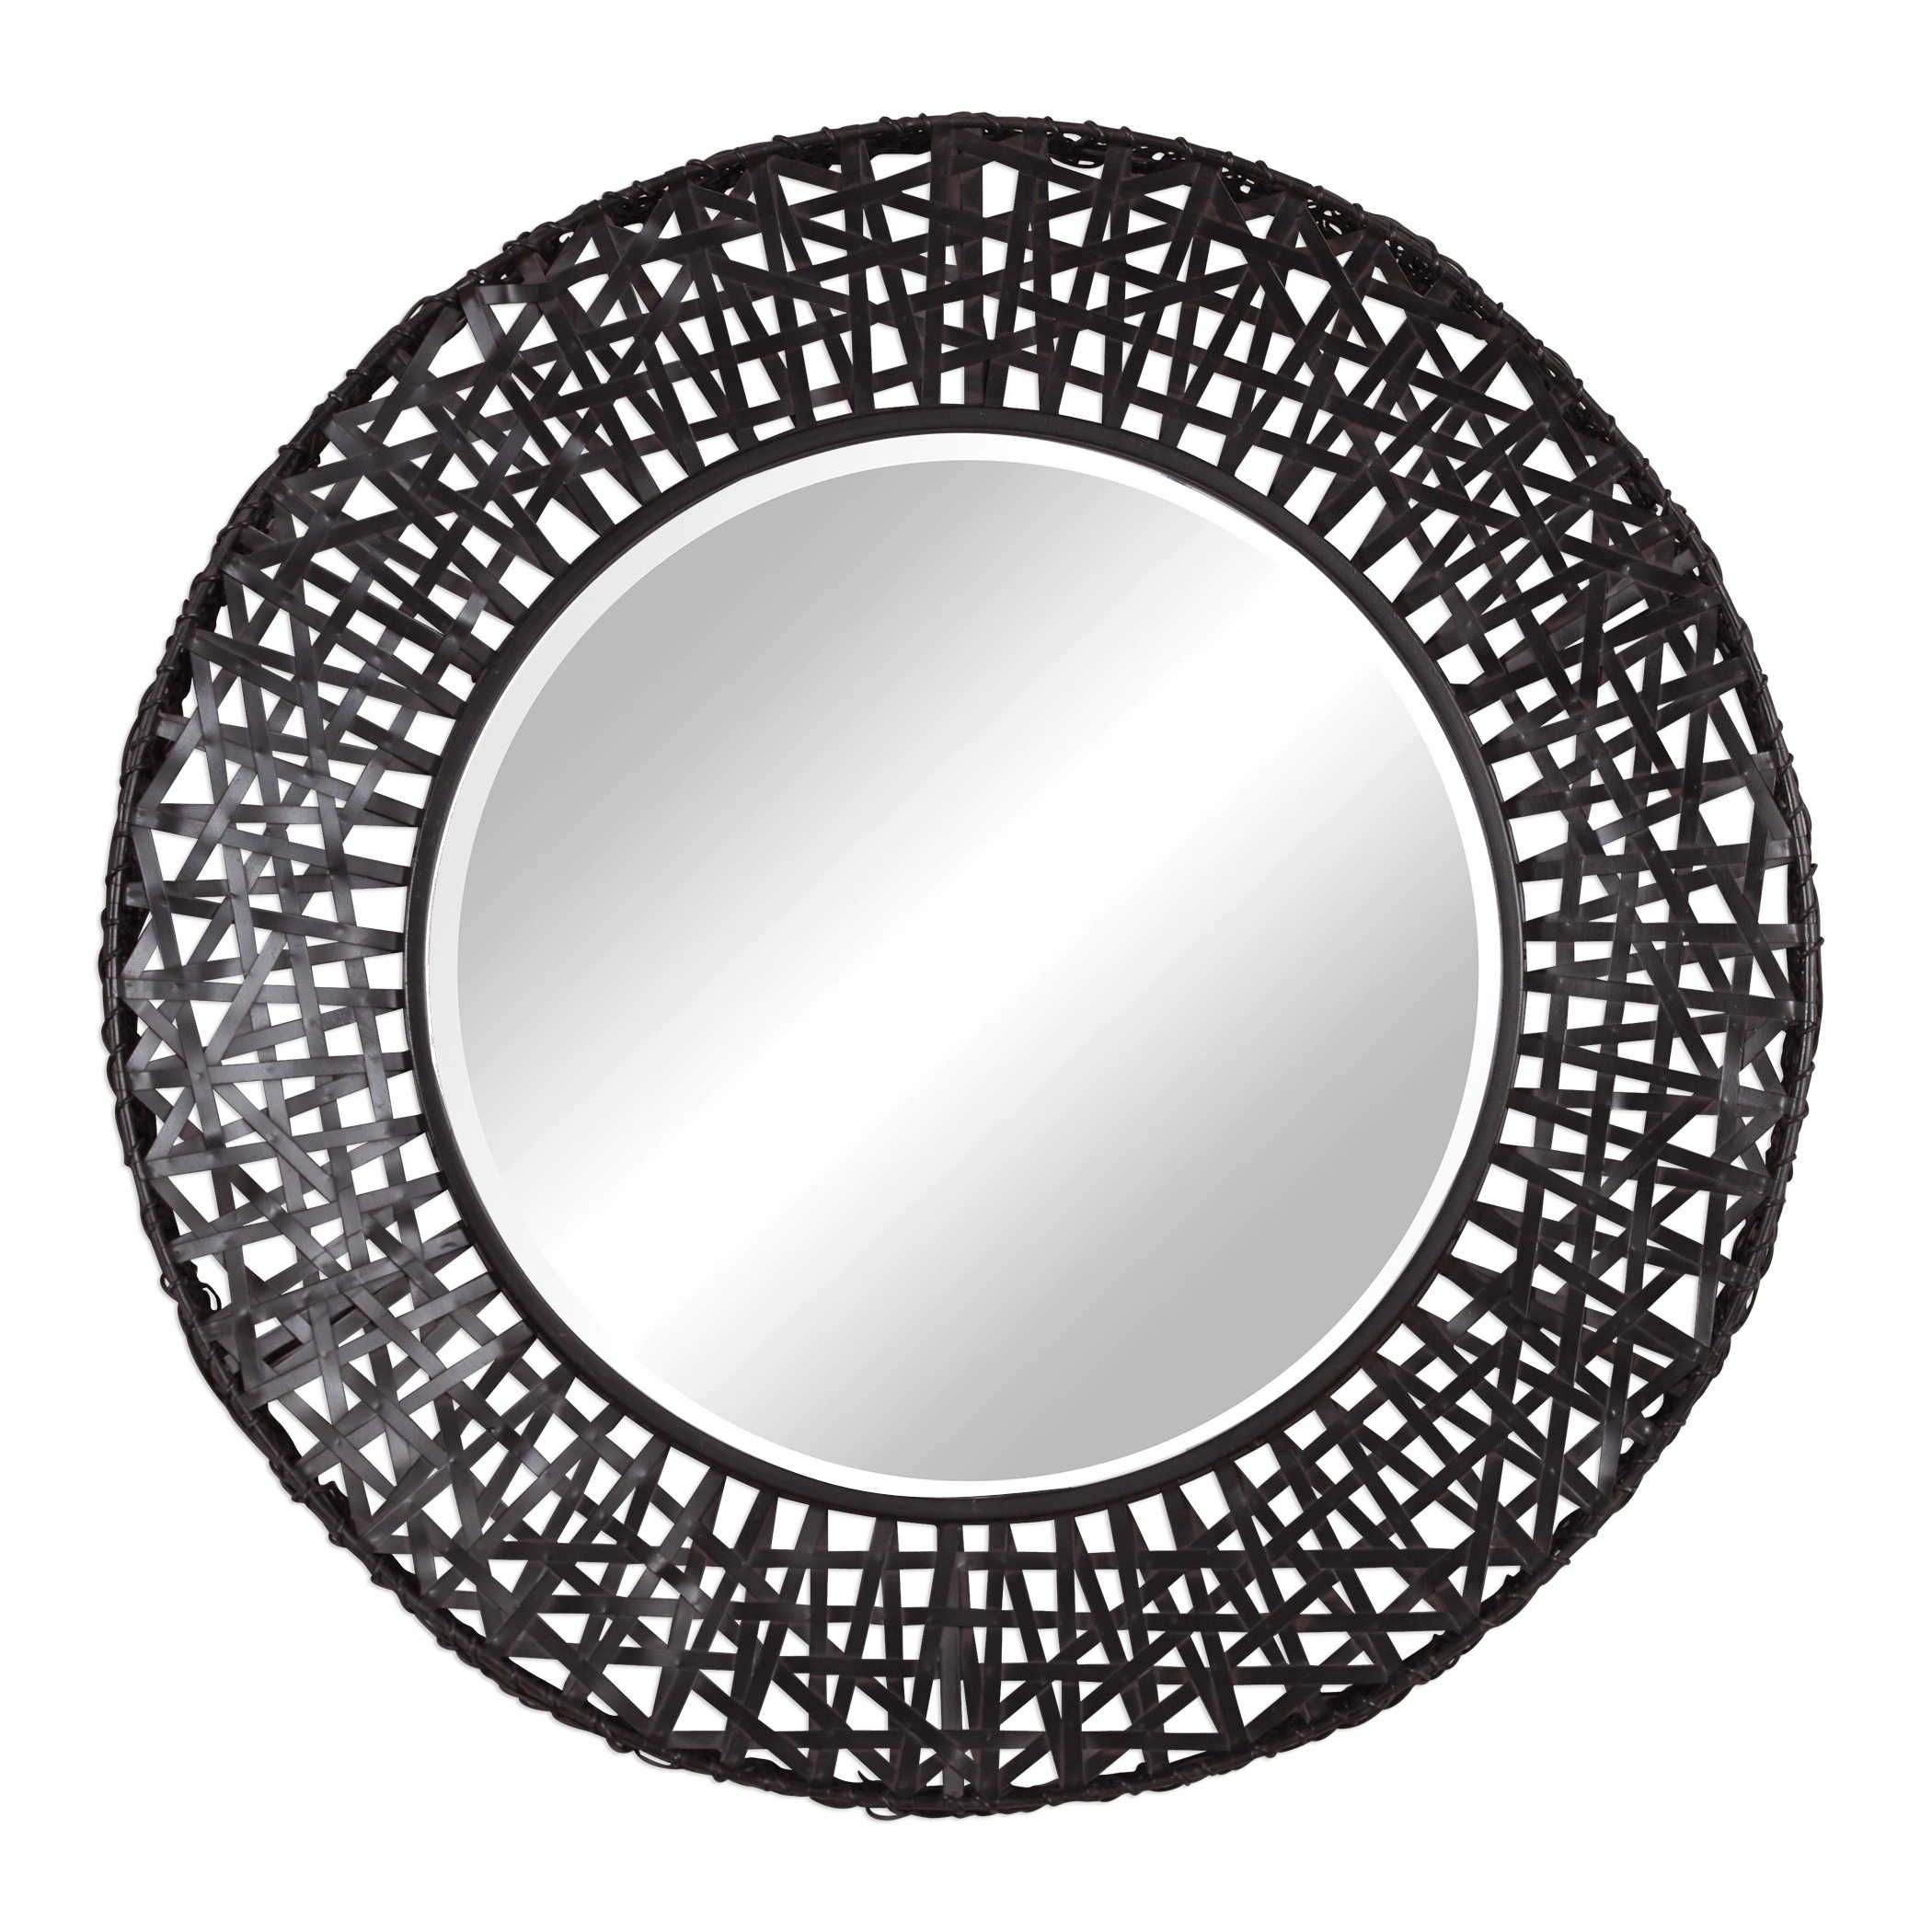 Woven Black Metal Strips Round Wall Mirror Modern Large 37 With Regard To Scalloped Round Wall Mirrors (View 9 of 15)